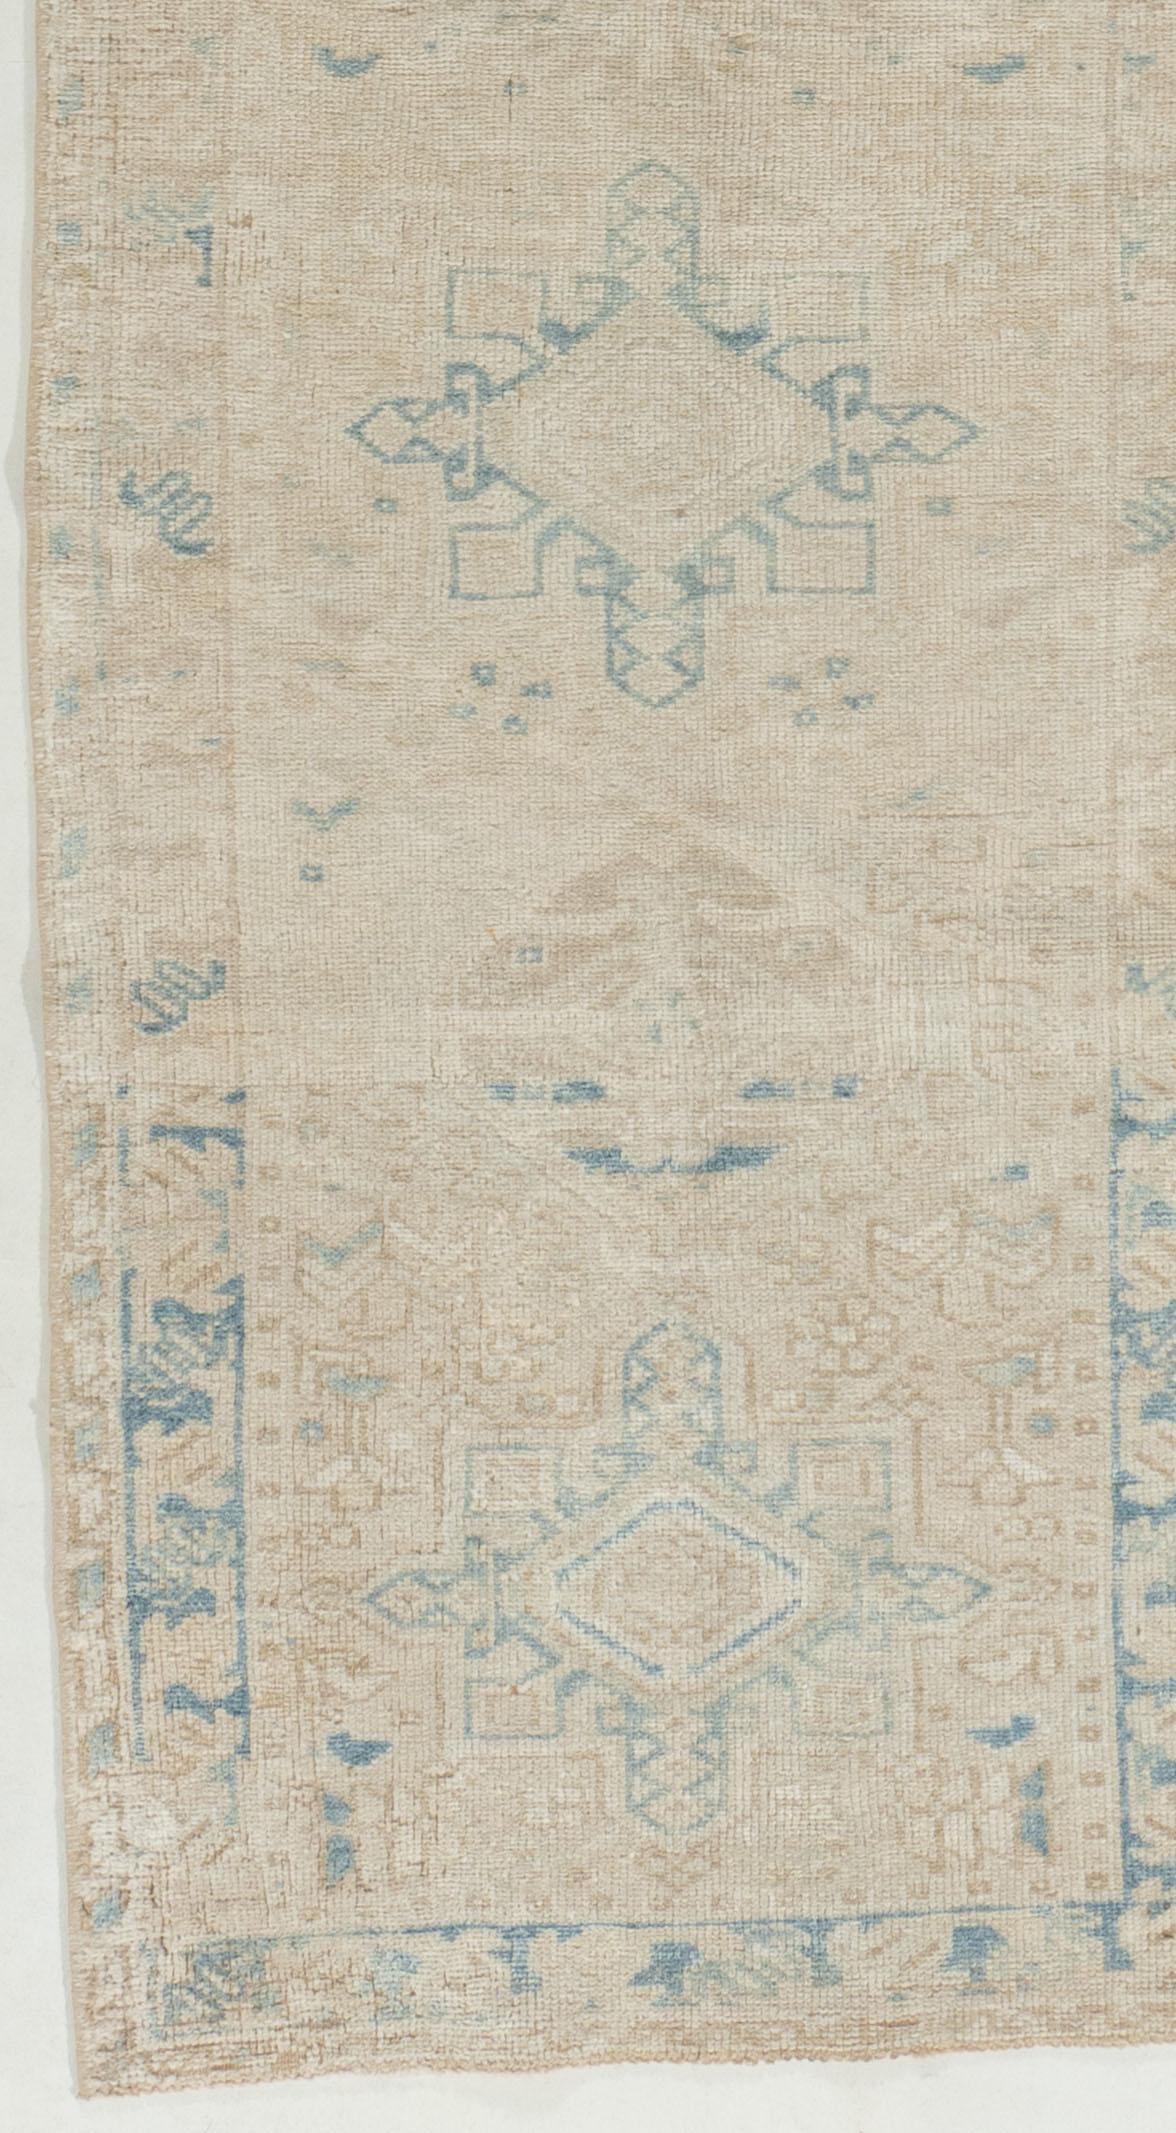 Vintage Persian Heriz Runner 2'6 X 7'11. As perpetually fashionable as they are collectible, traditional Heriz rugs are skillfully woven in emphatic geometric designs. This rug has a character all its own with soft colors giving a feeling of